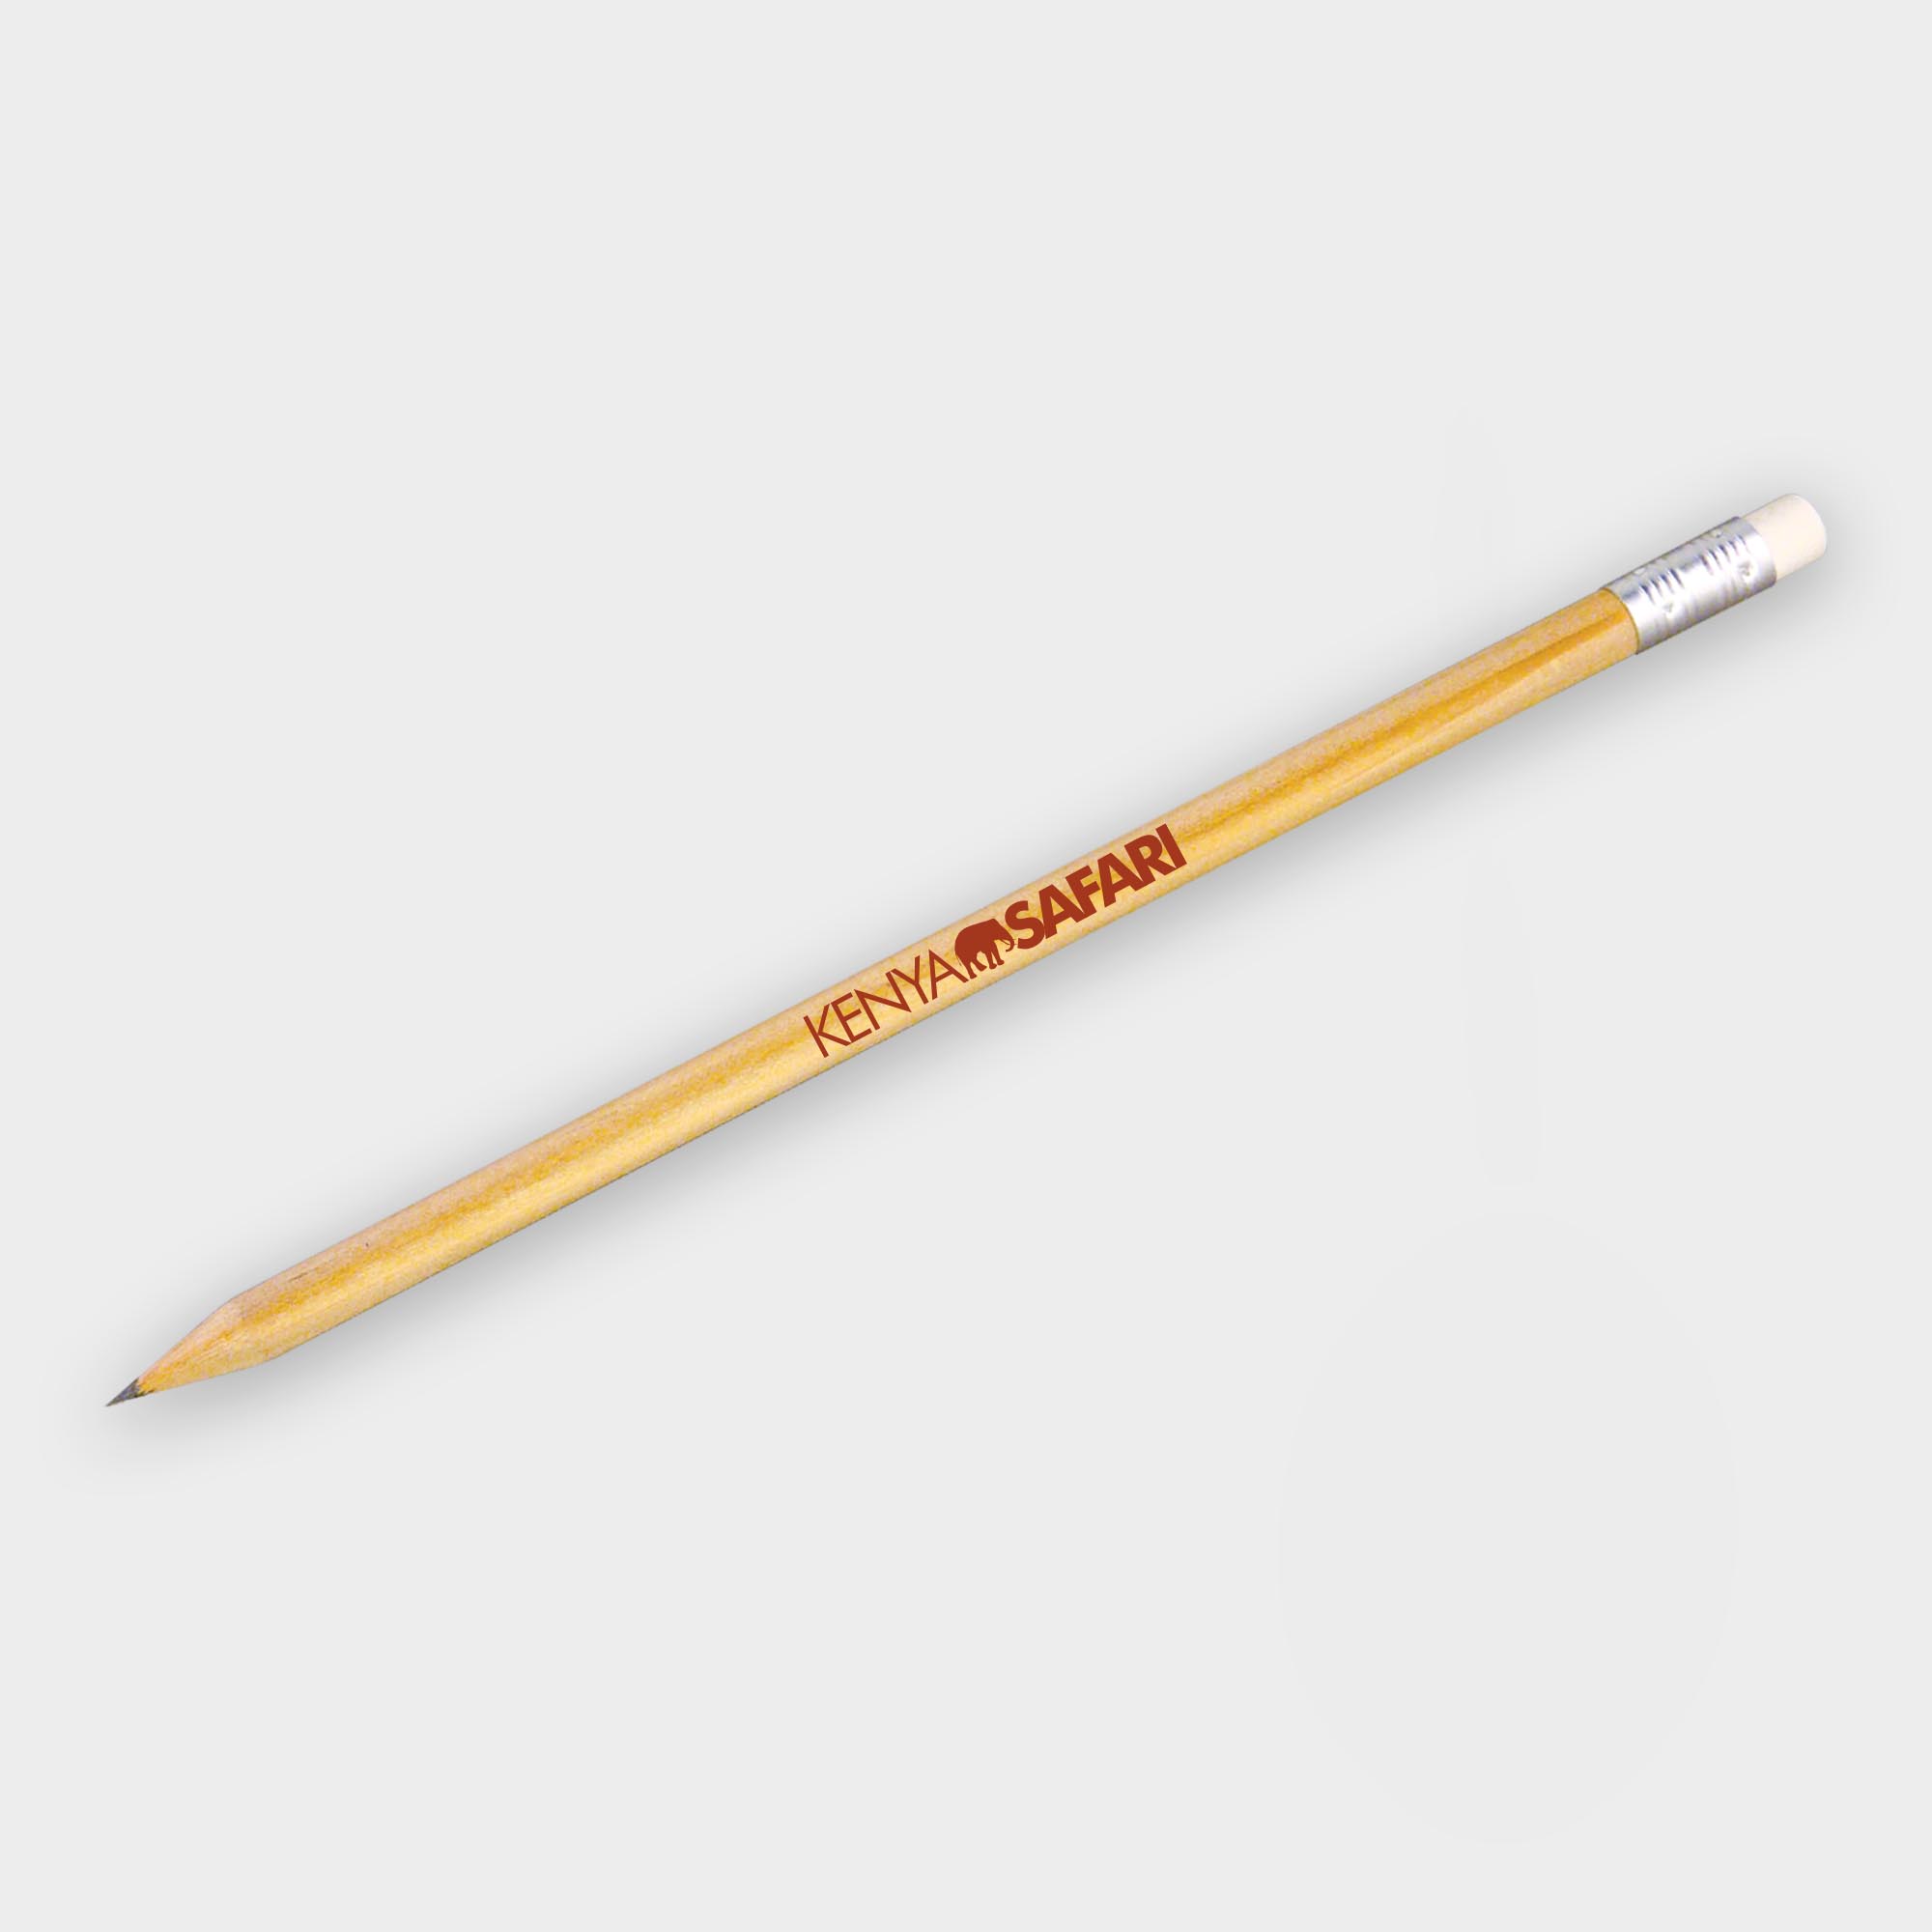 Promotional Wooden Eco Pencil with Eraser - FSC